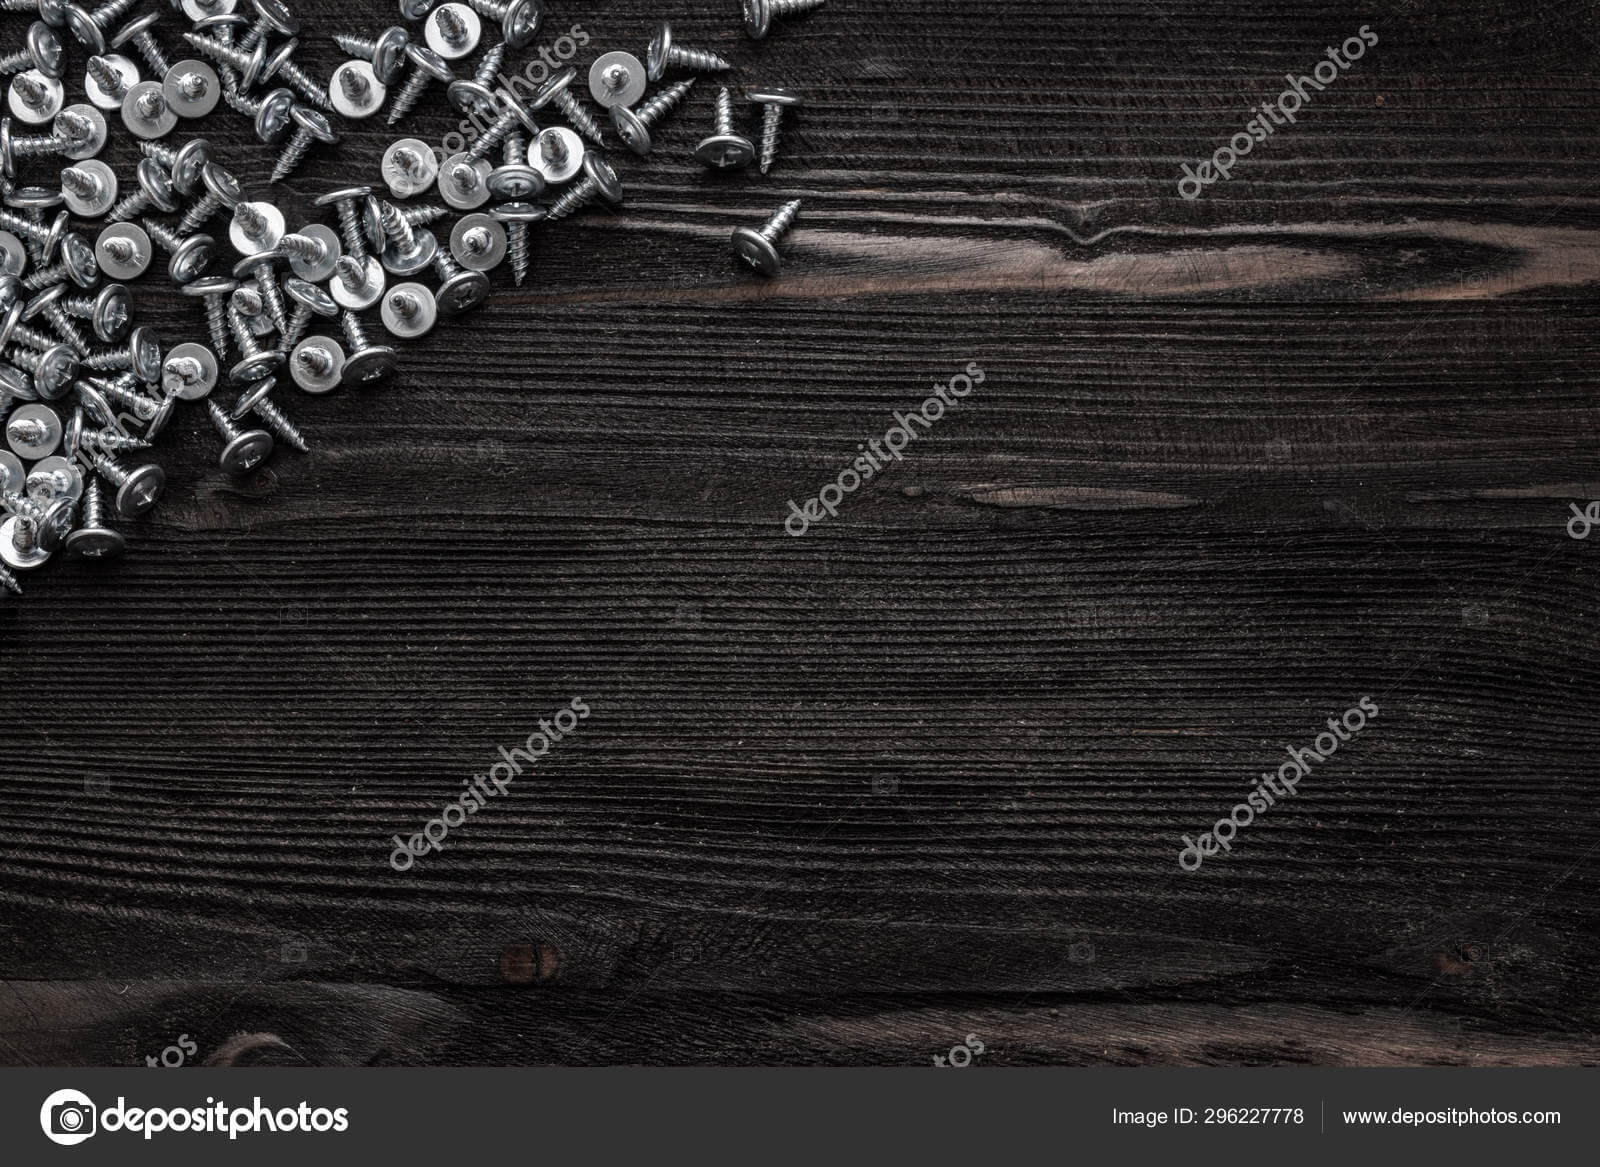 Some Wood Crews On Dark Wooden Desk Board Surface. Top View In Borderless Certificate Templates